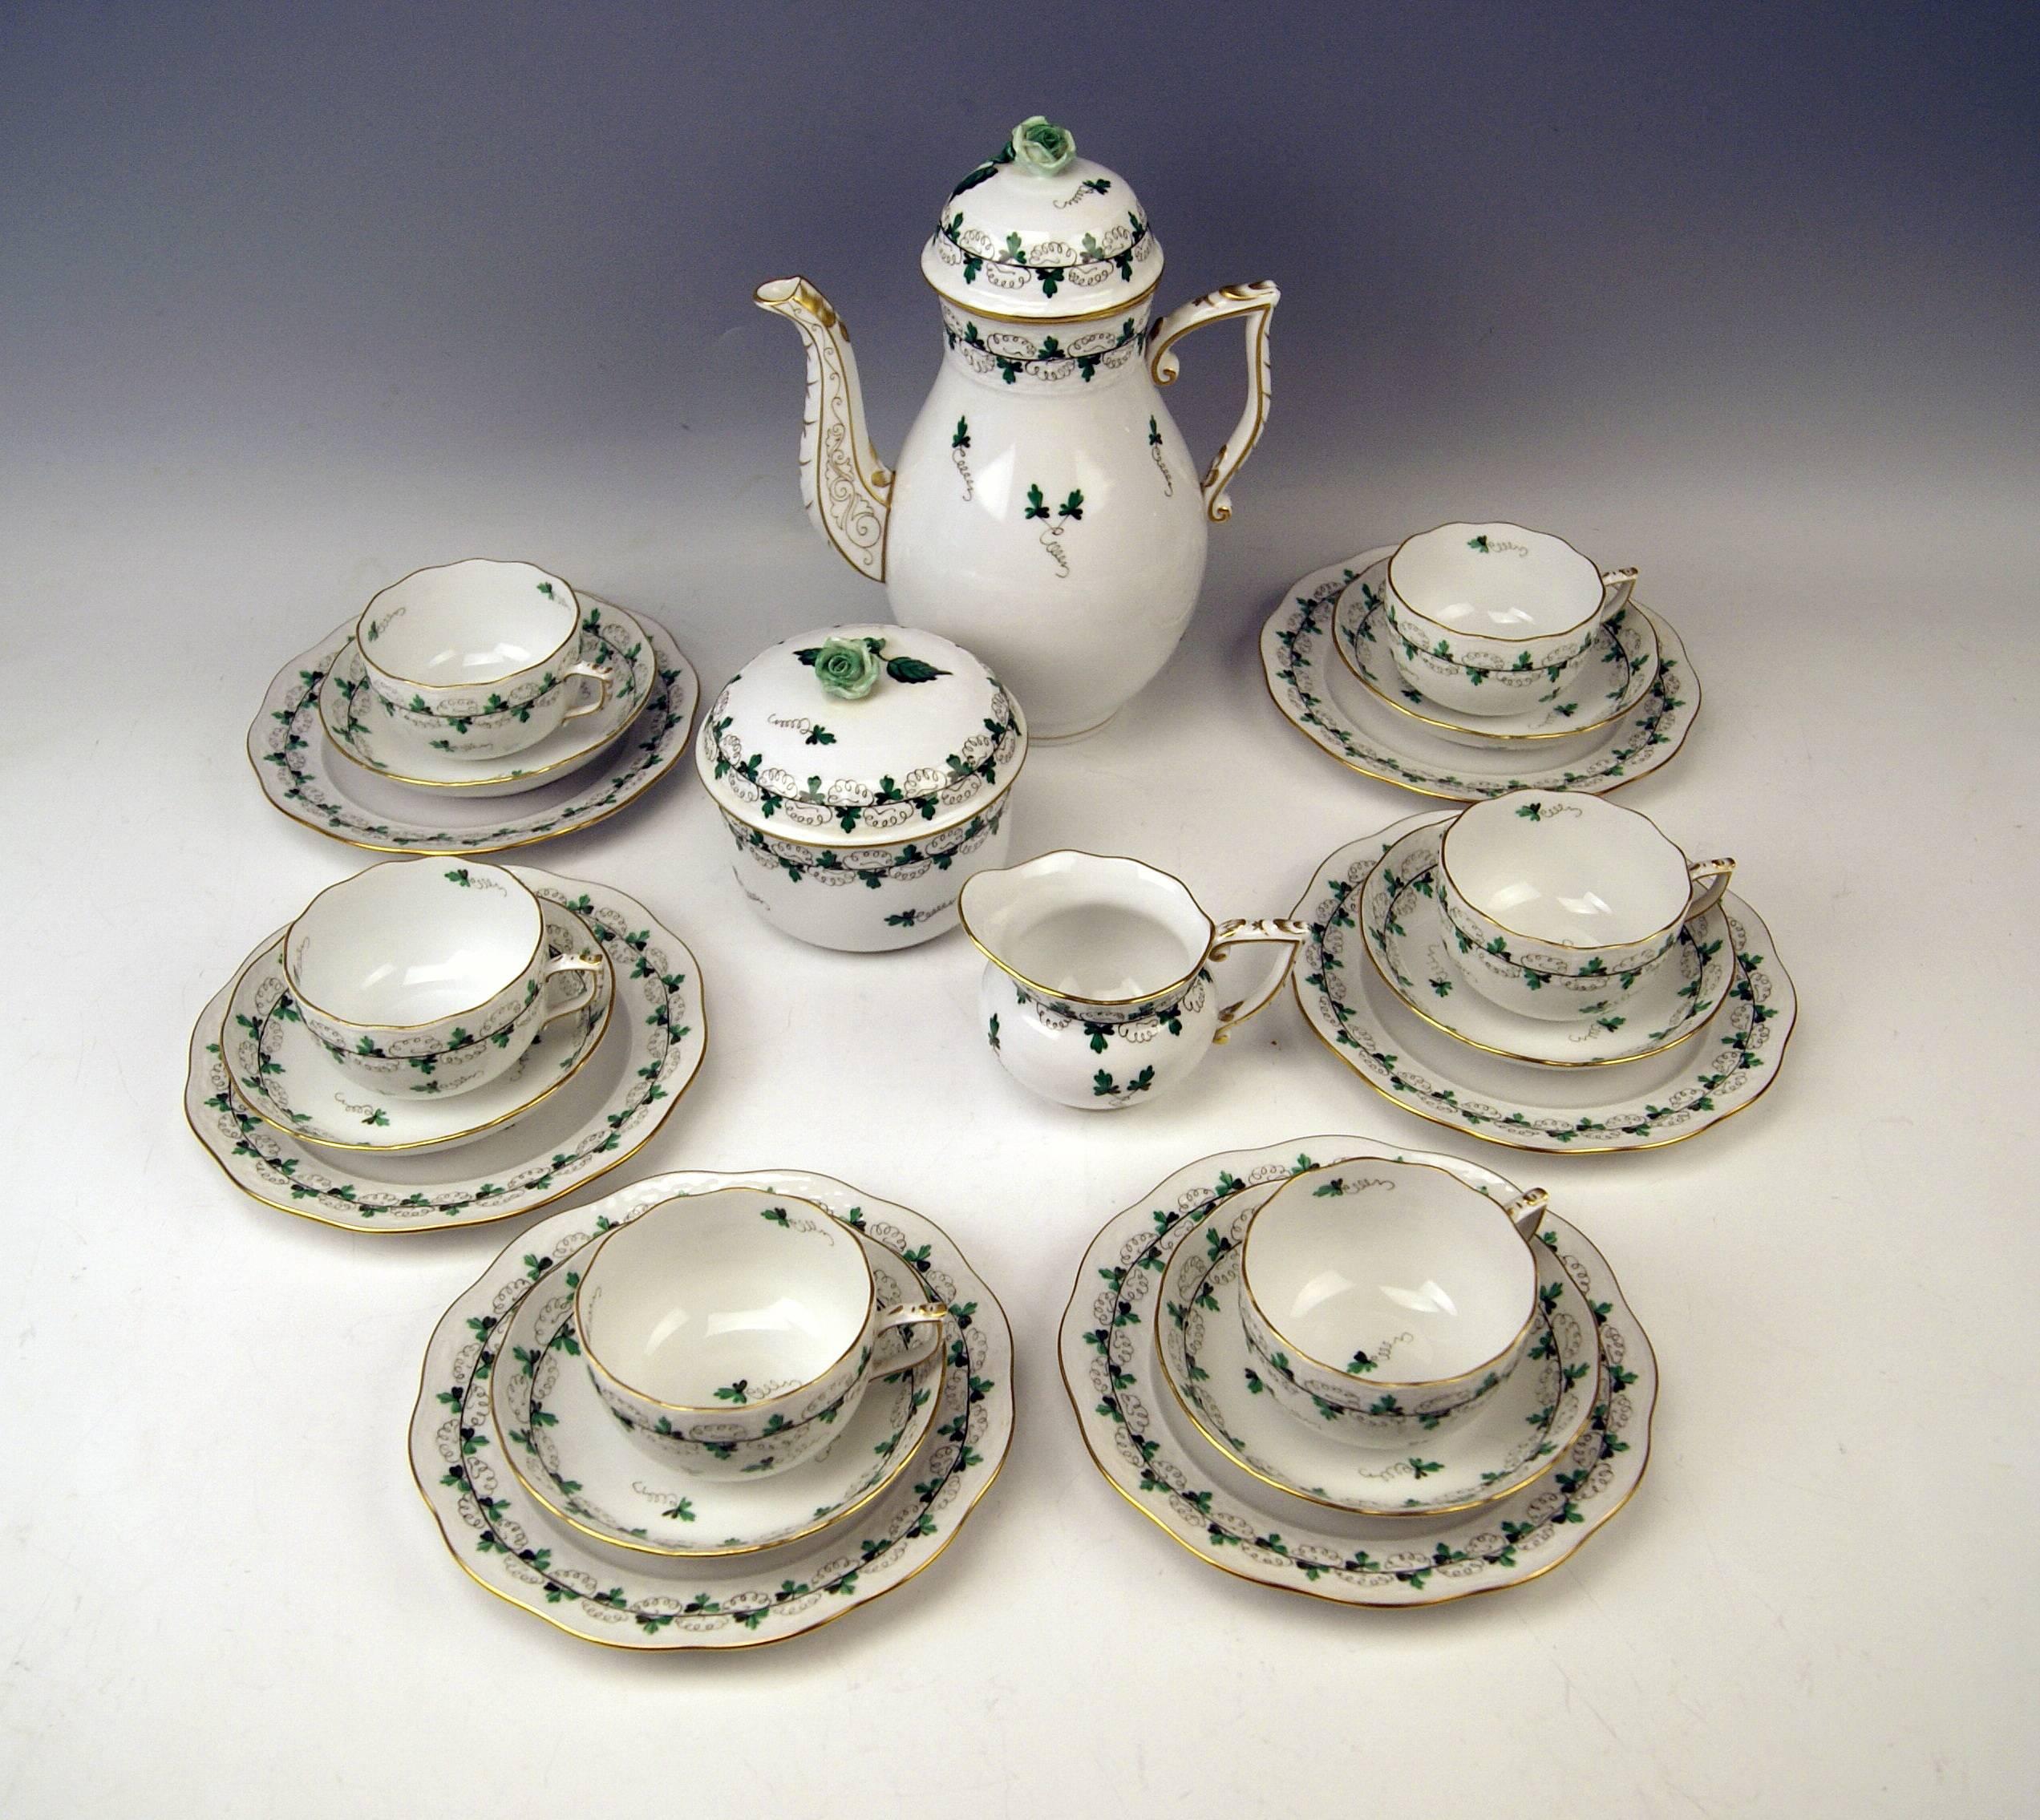 We invite you here to look at a splendid as well as nicest Herend coffee set for six persons: 

This Herend coffee set is of finest appearance due to its delicate green leaves paintings laid on white porcelain as well as due to golden painted